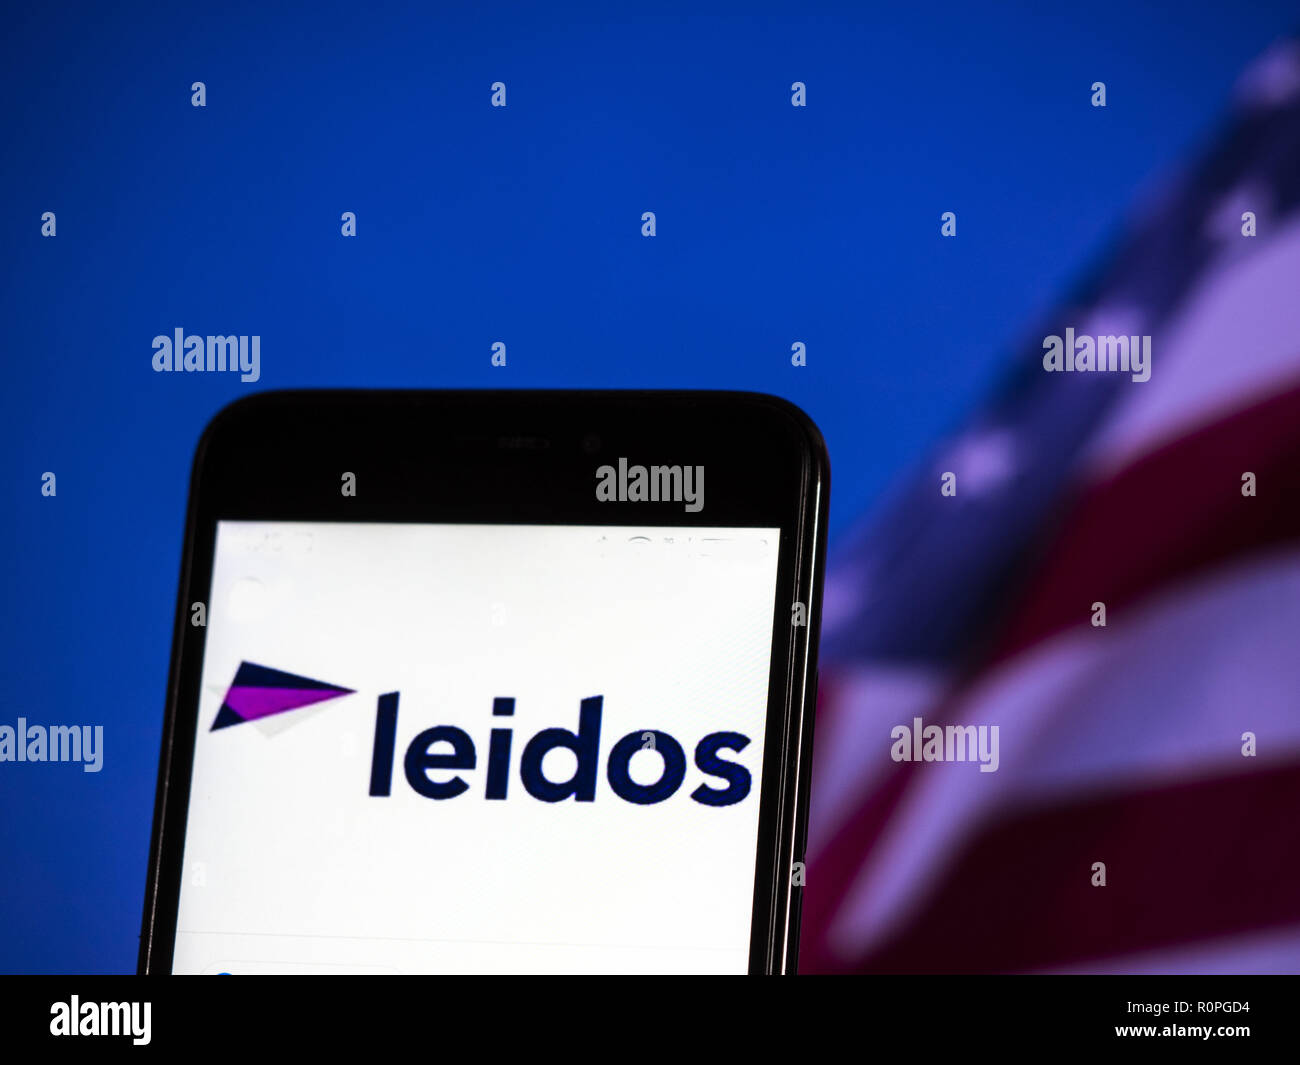 Kiev, Ukraine. 6th Nov, 2018. Leidos Scientific research company logo seen displayed on smart phone. Leidos, formerly known as Science Applications International Corporation, is an American defense, aviation, information technology, and biomedical research company, that provides scientific, engineering, systems integration, and technical services Credit: Igor Golovniov/SOPA Images/ZUMA Wire/Alamy Live News Stock Photo